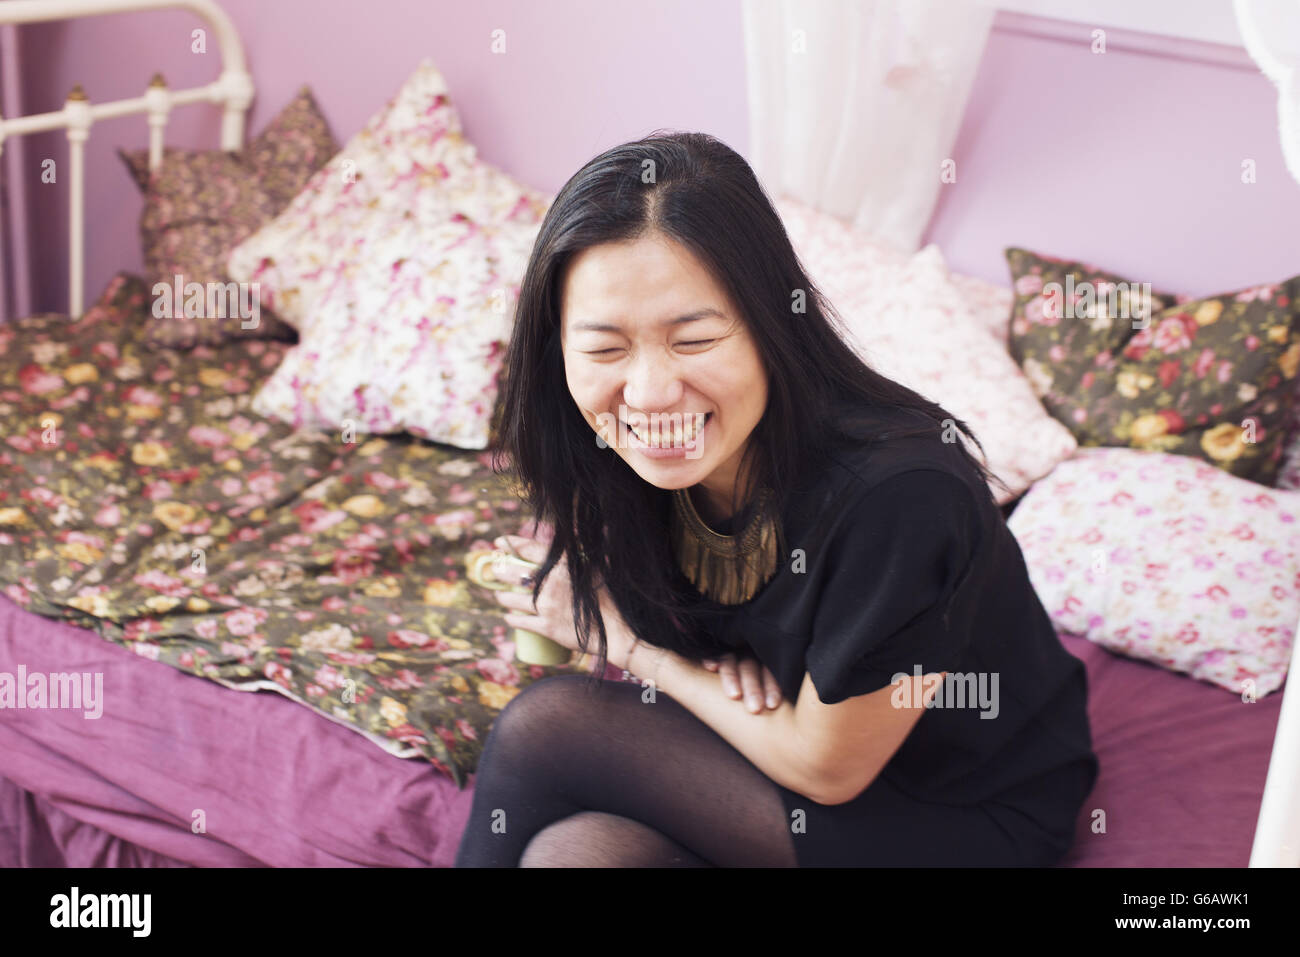 Woman sitting on bed laughing Stock Photo